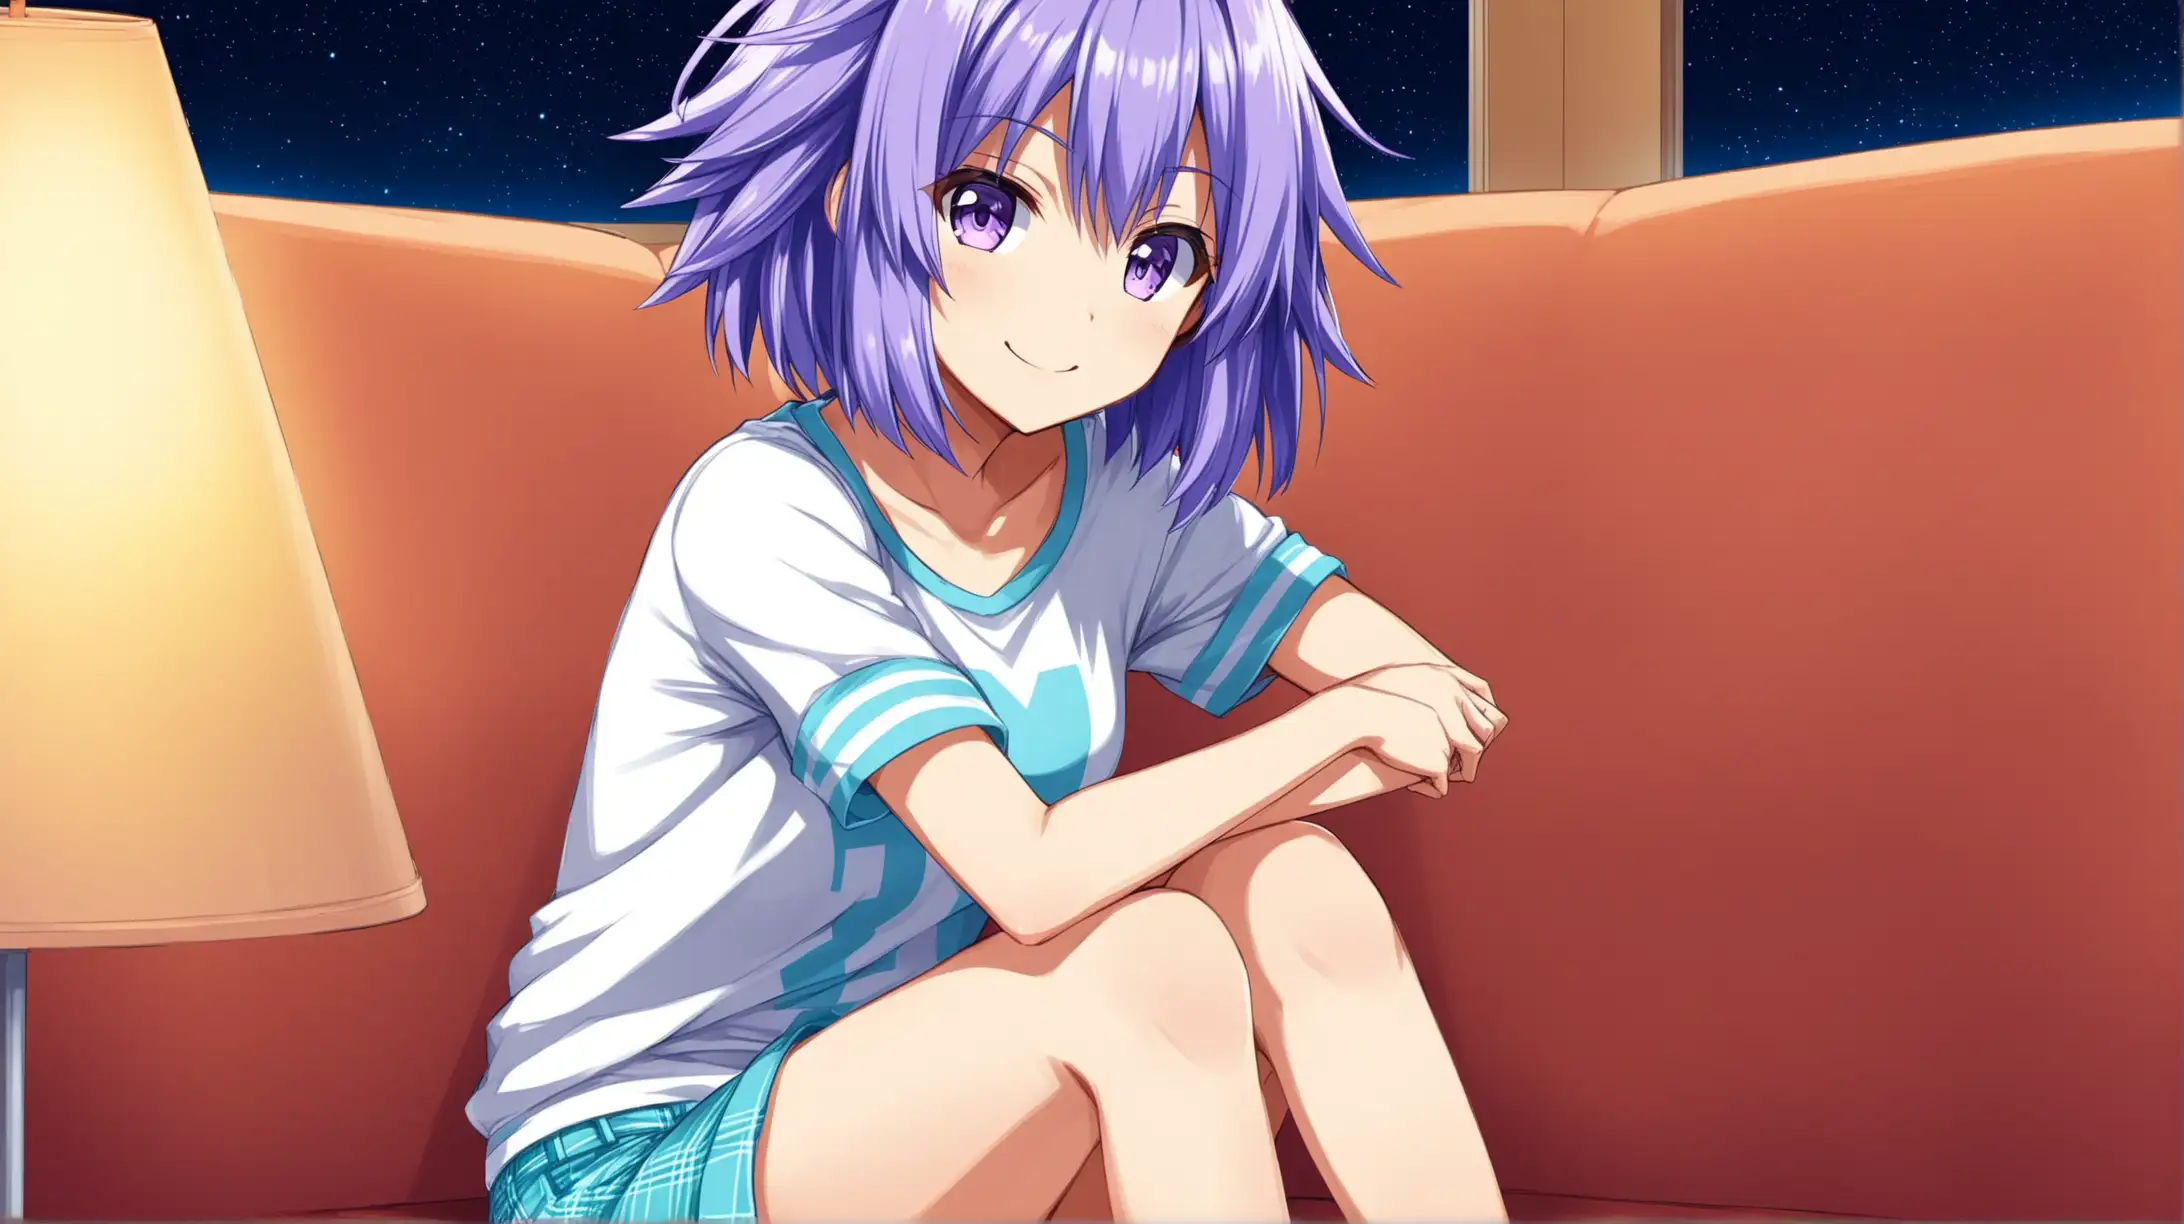 Draw the character Neptune from the Hyperdimension Neptunia series with short hair sitting indoors alone at night while she is wearing casual clothes and smiling at the viewer